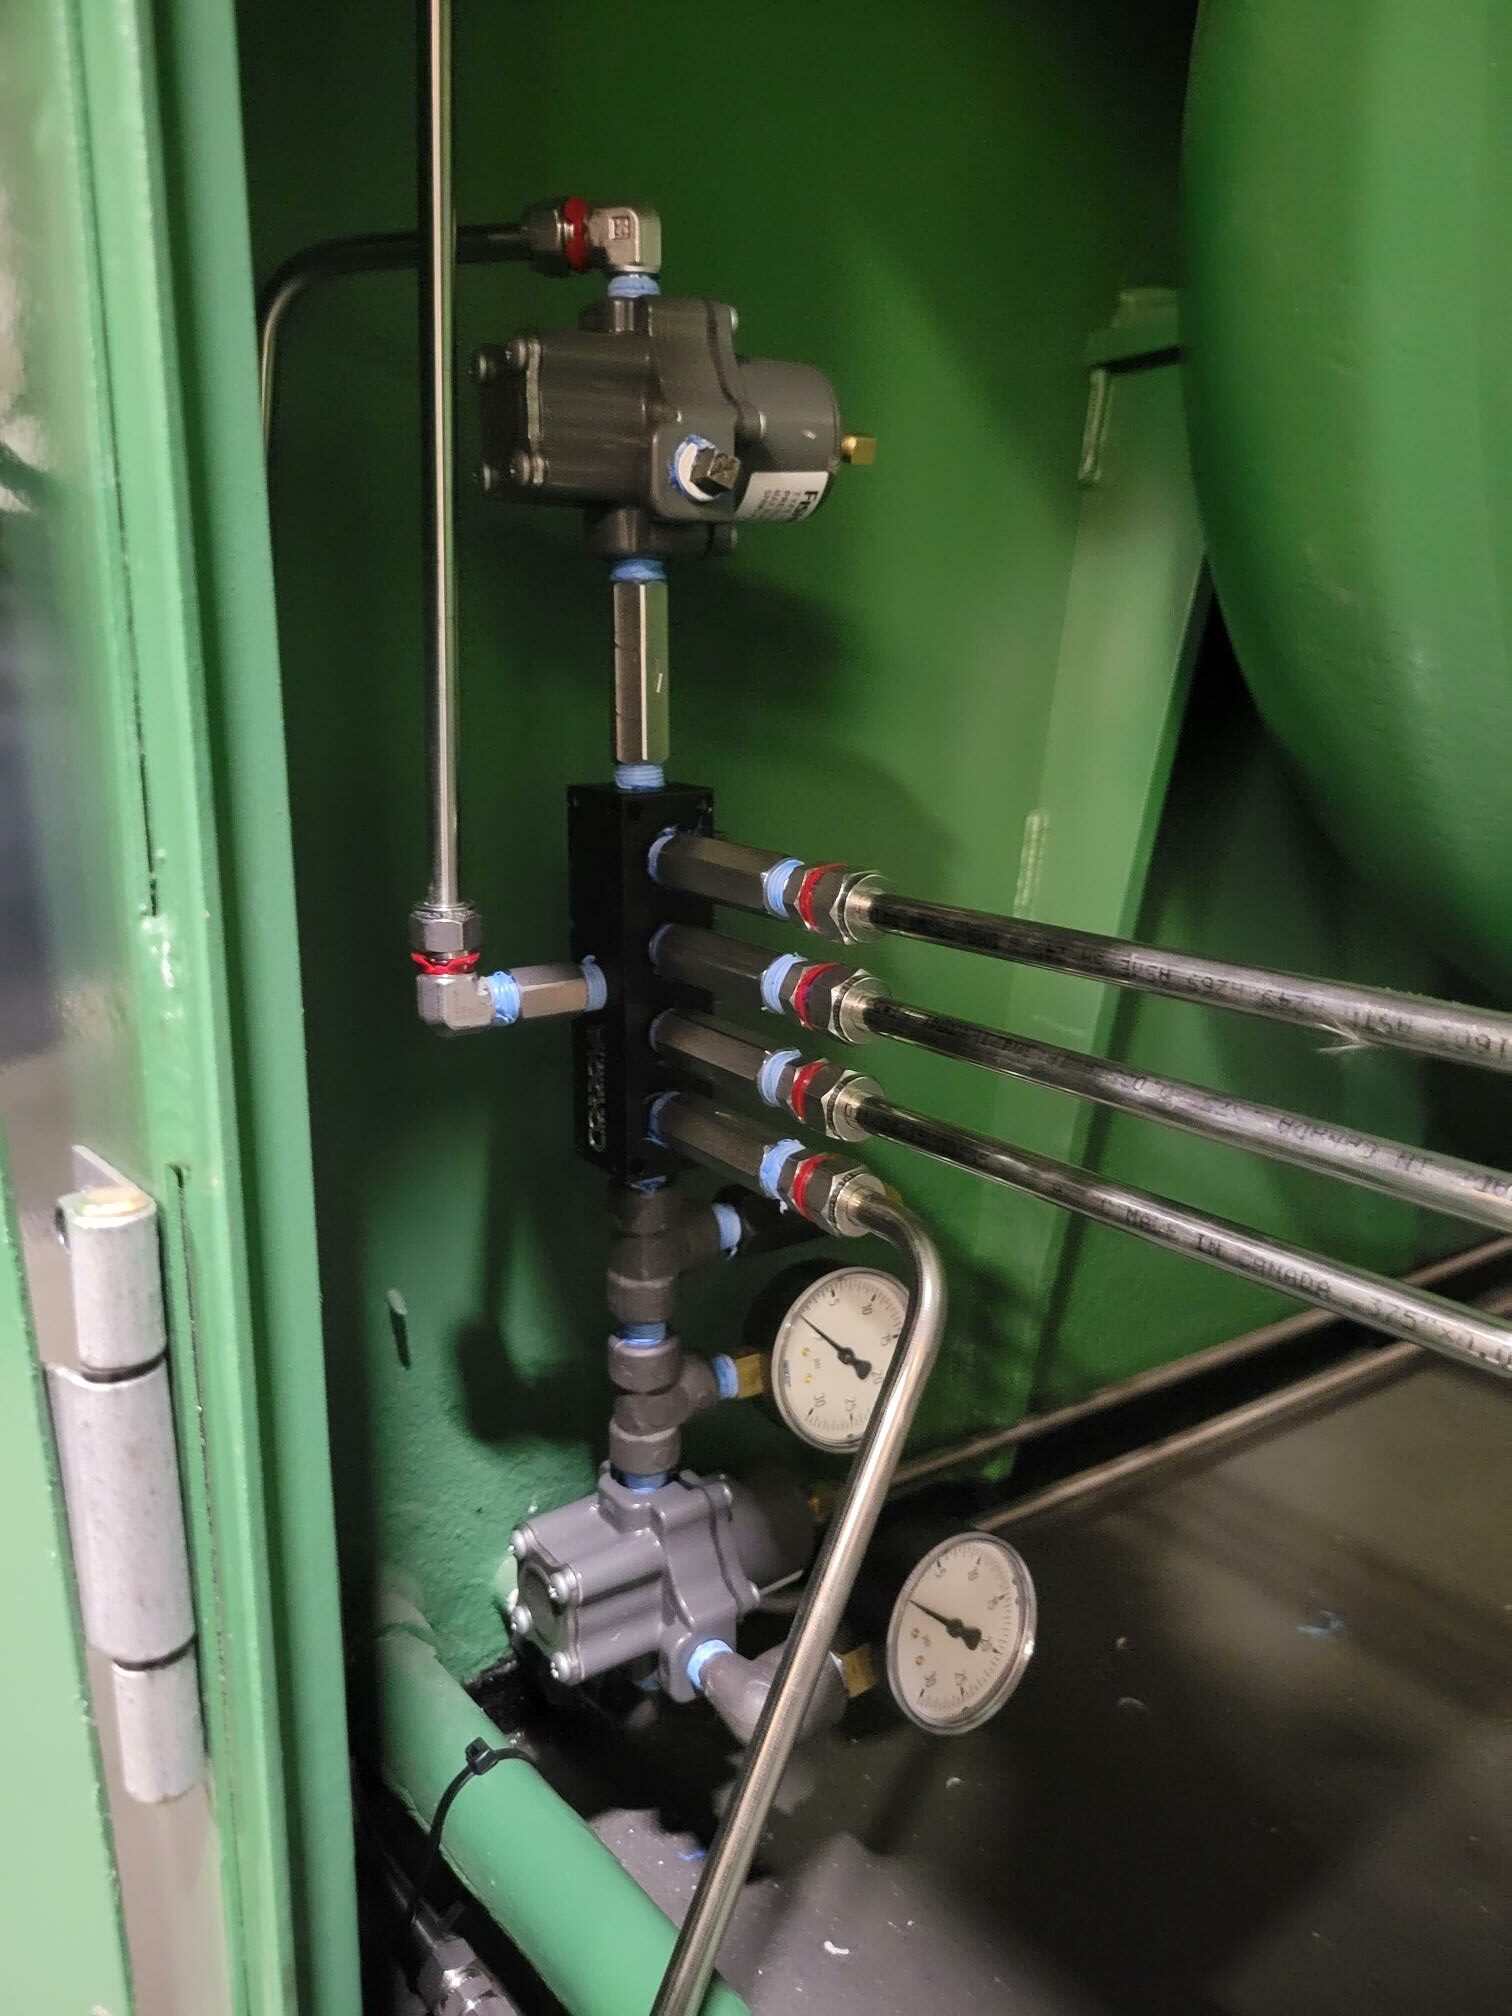 VentHawk controllers equipped with a relief valve that allows all venting equipment to continue to operate.